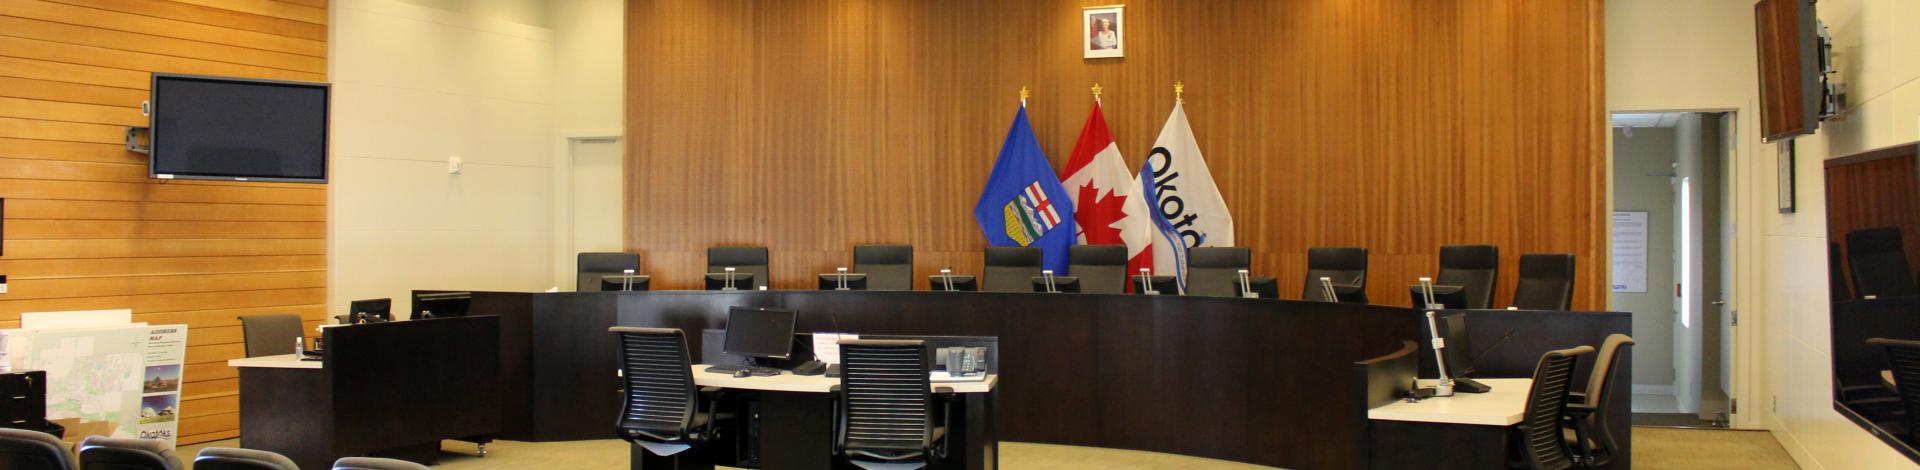 Town of Okotoks Council Chambers